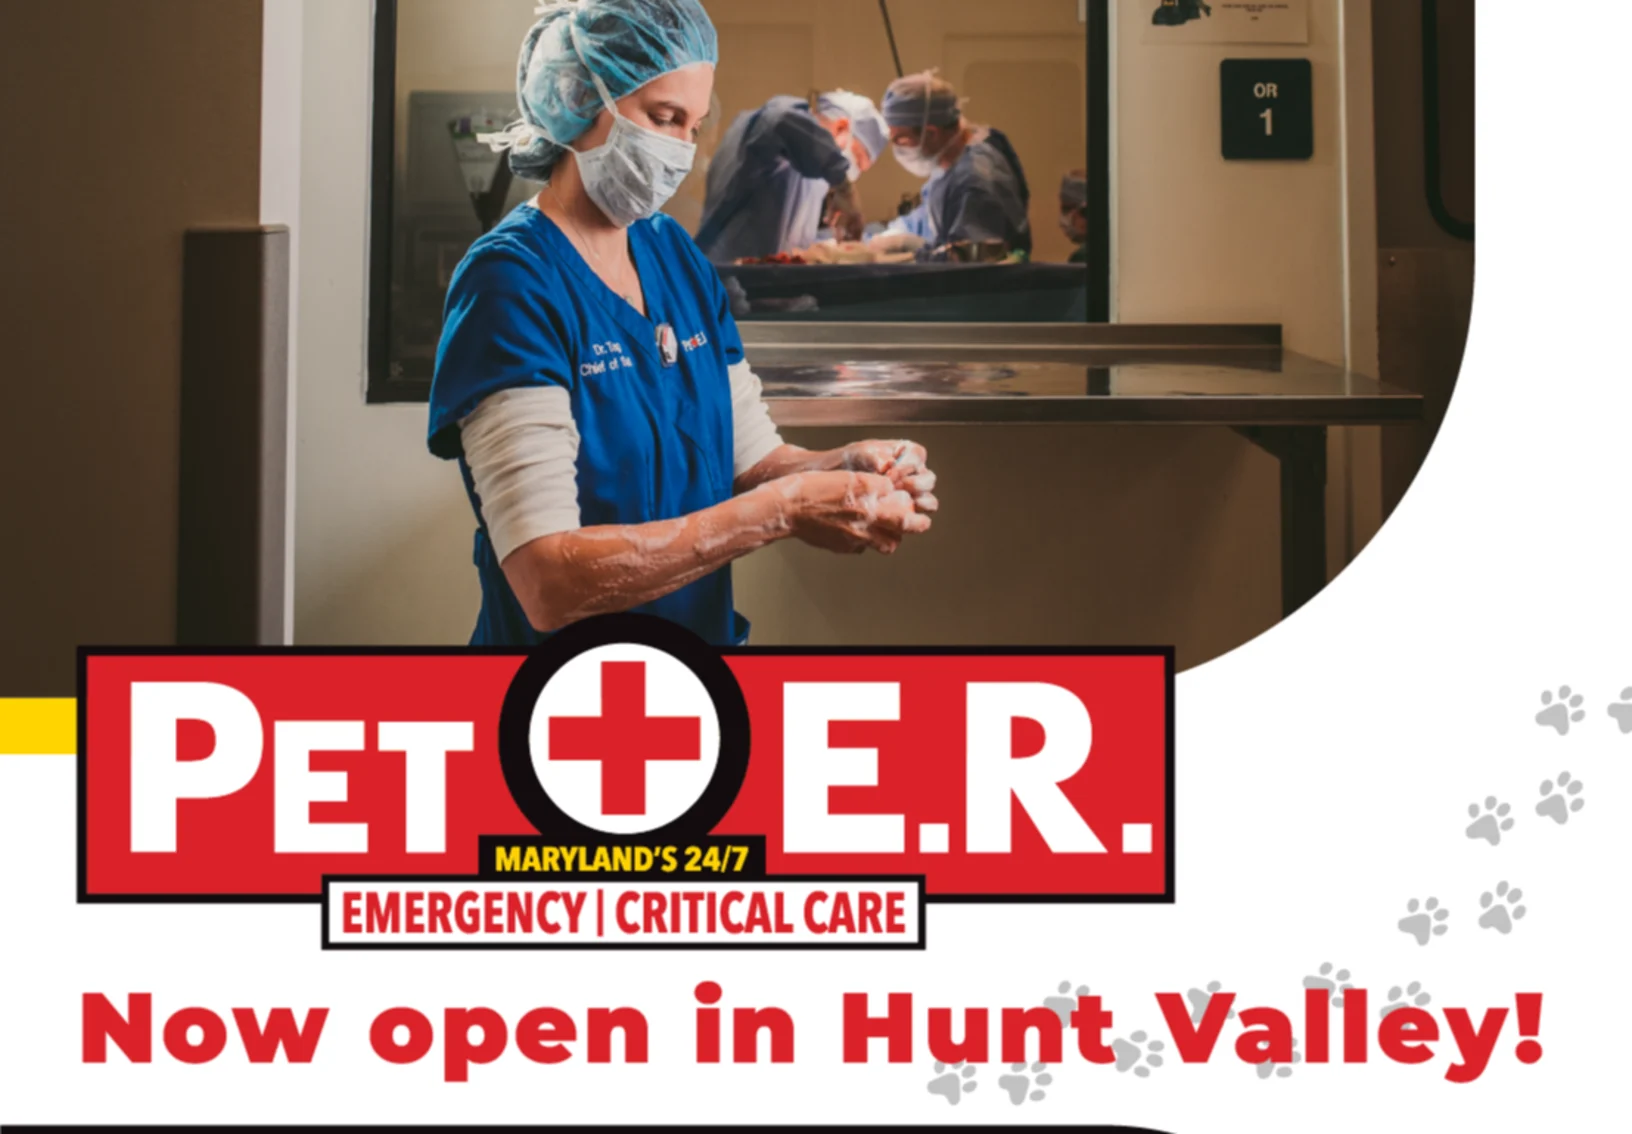 Doctor Scrubbing in for surgery. Now open in Hunt Valley! (HUNT VALLEY ADDRESS)